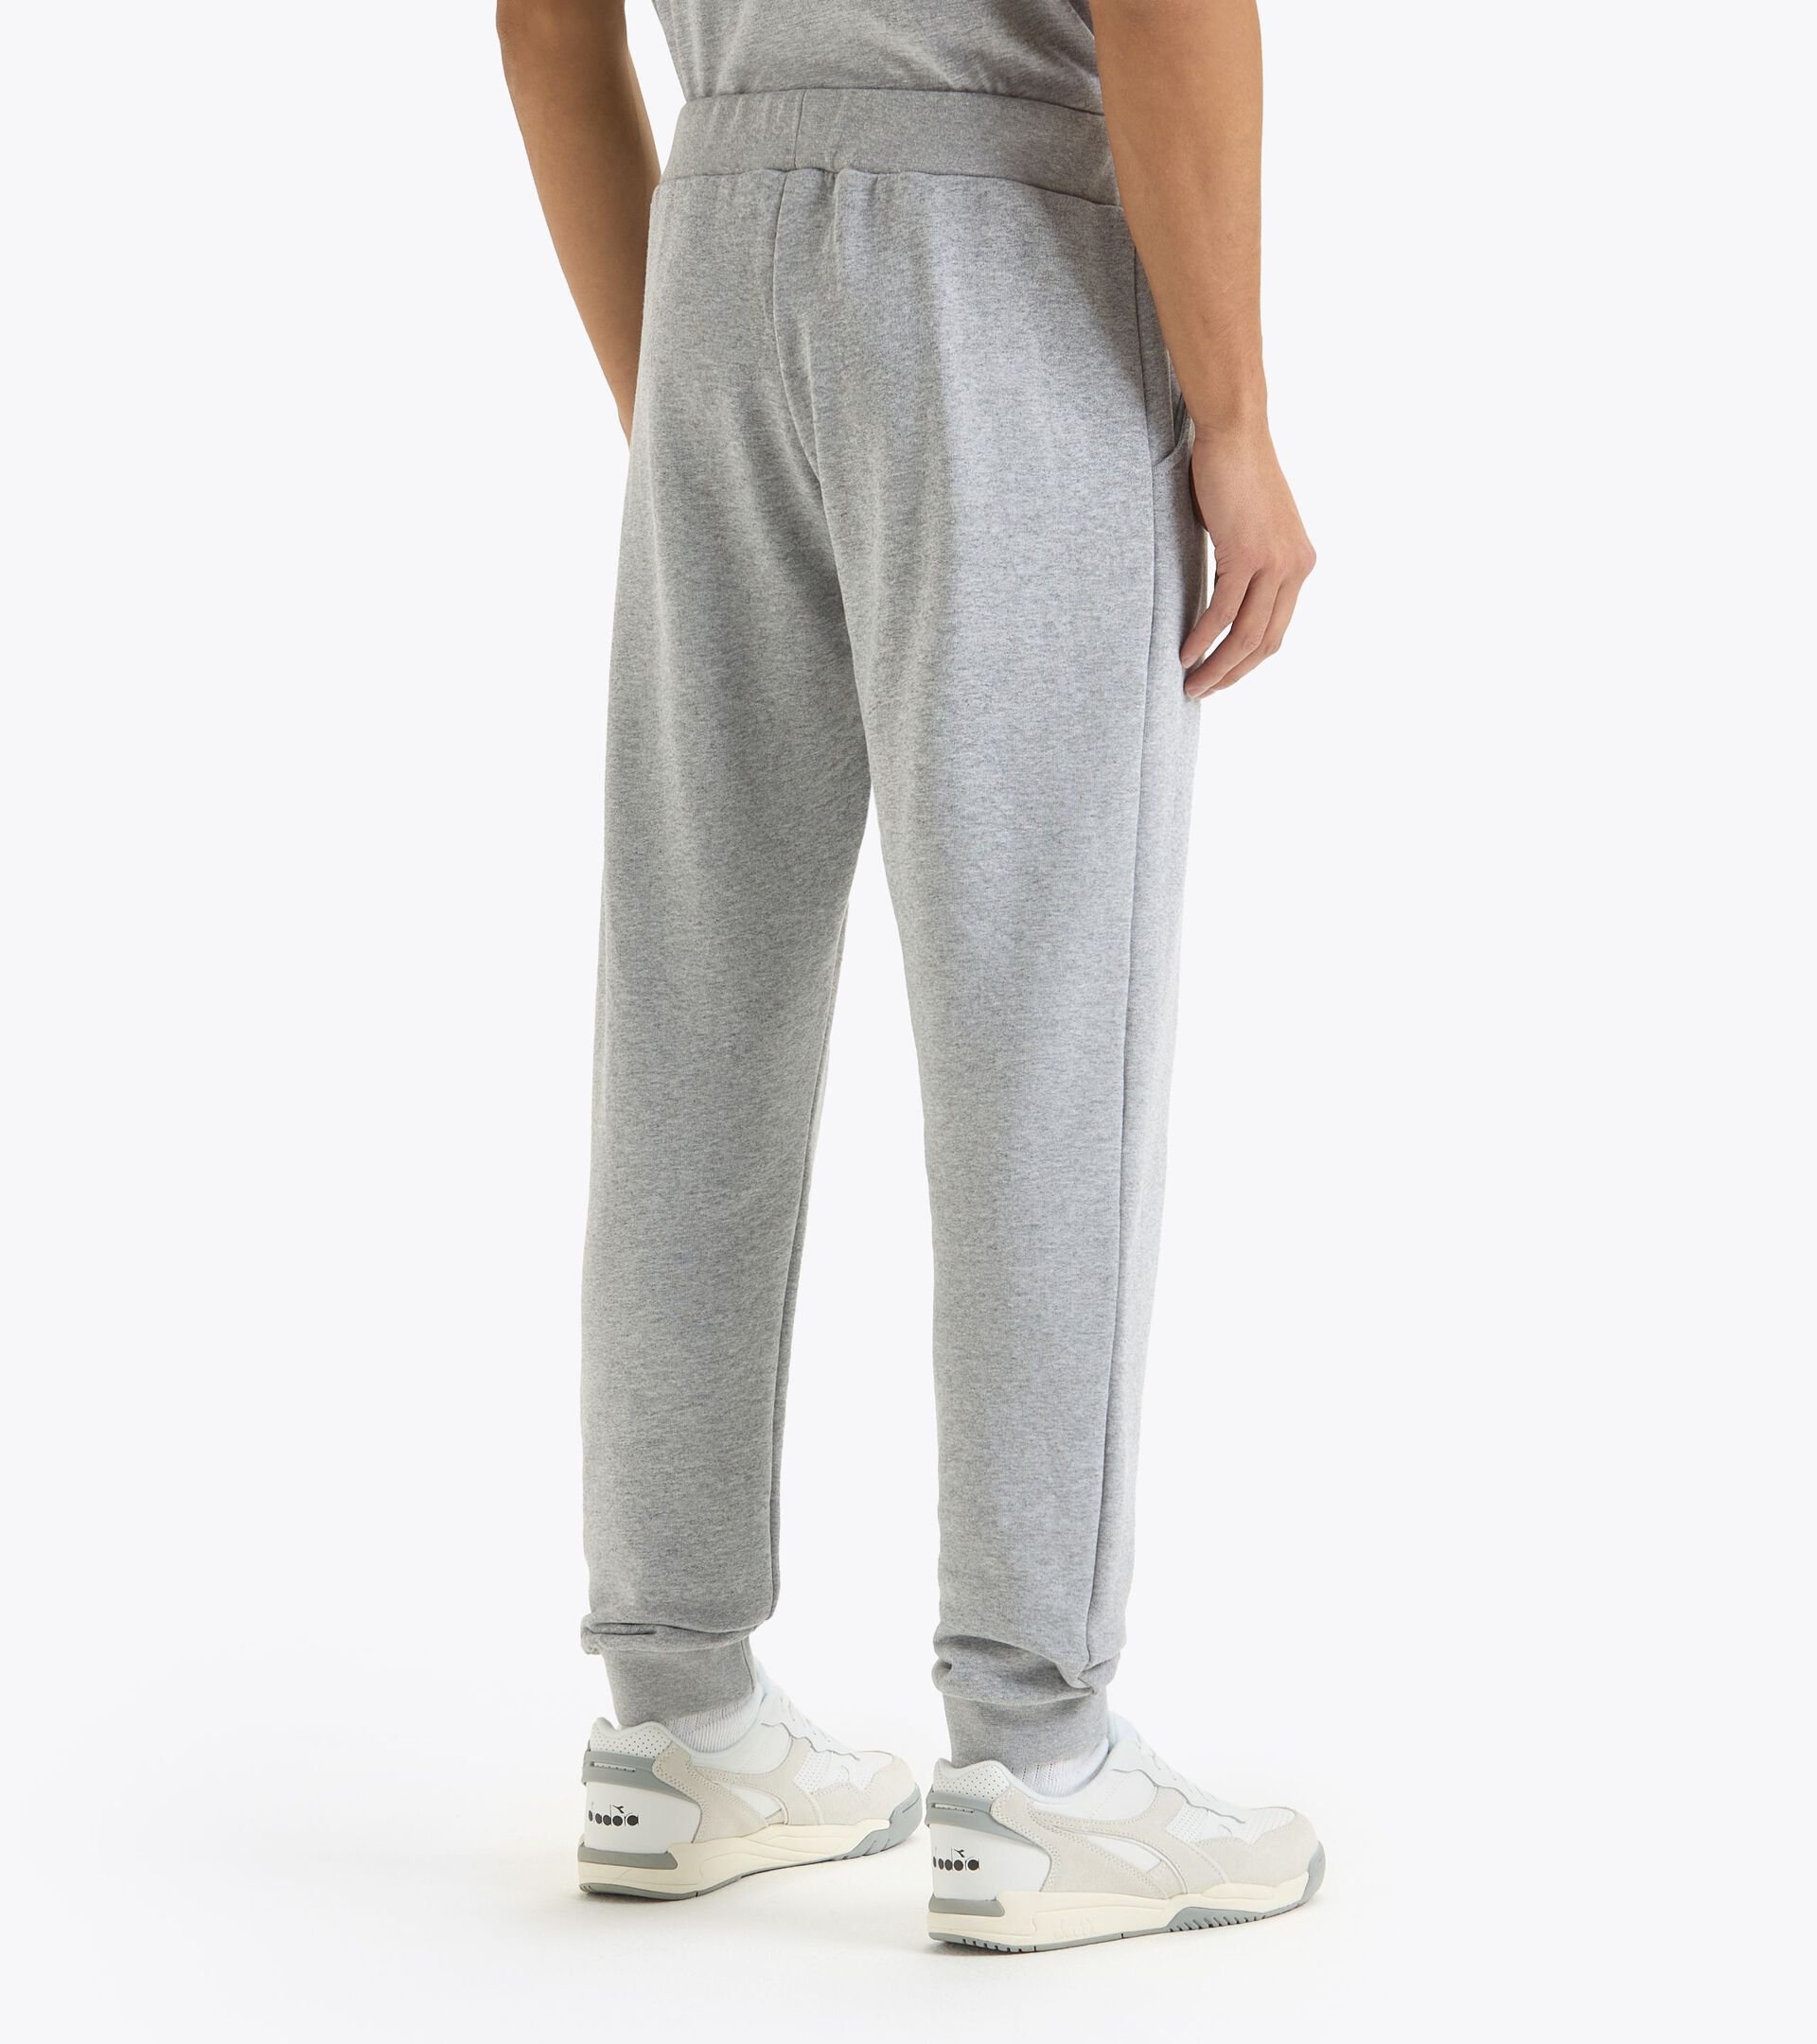 Sporty sweatpants - Made in Italy - Gender Neutral PANTS LOGO HIGH RISE MELANGE - Diadora